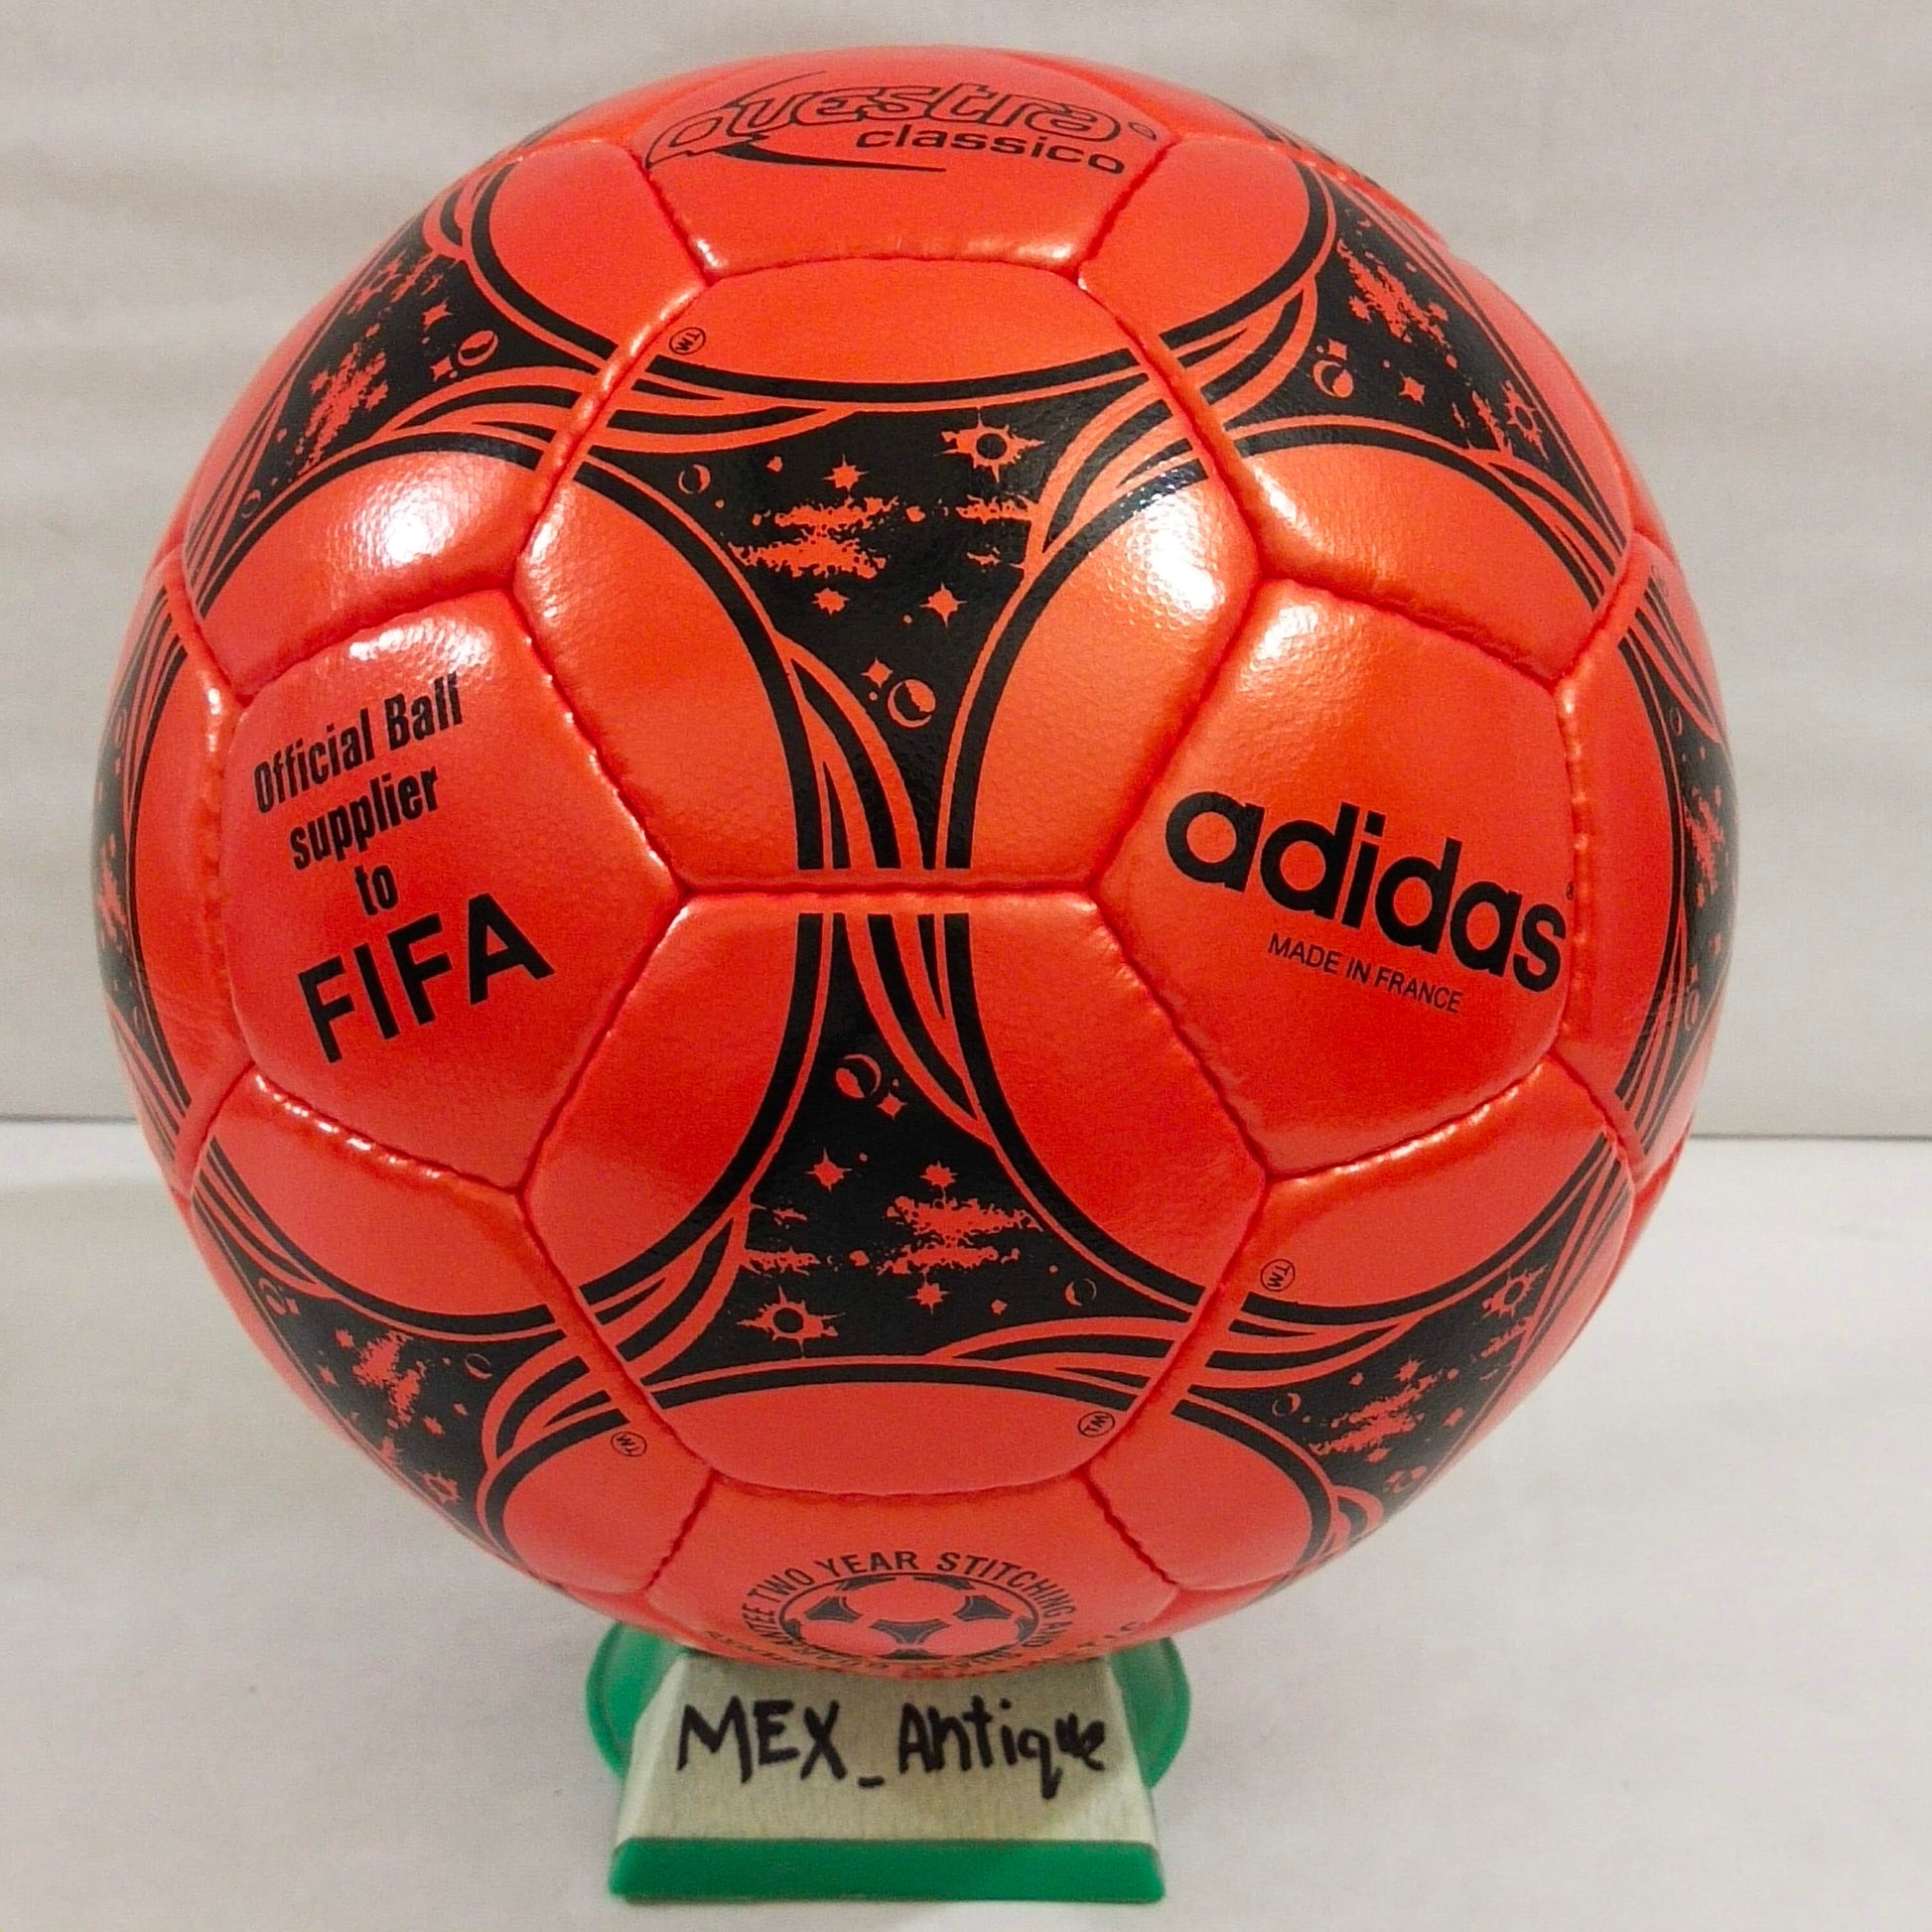 Adidas Questra | FIFA World Cup 1994 | Official Winter Ball | SIZE 5 03